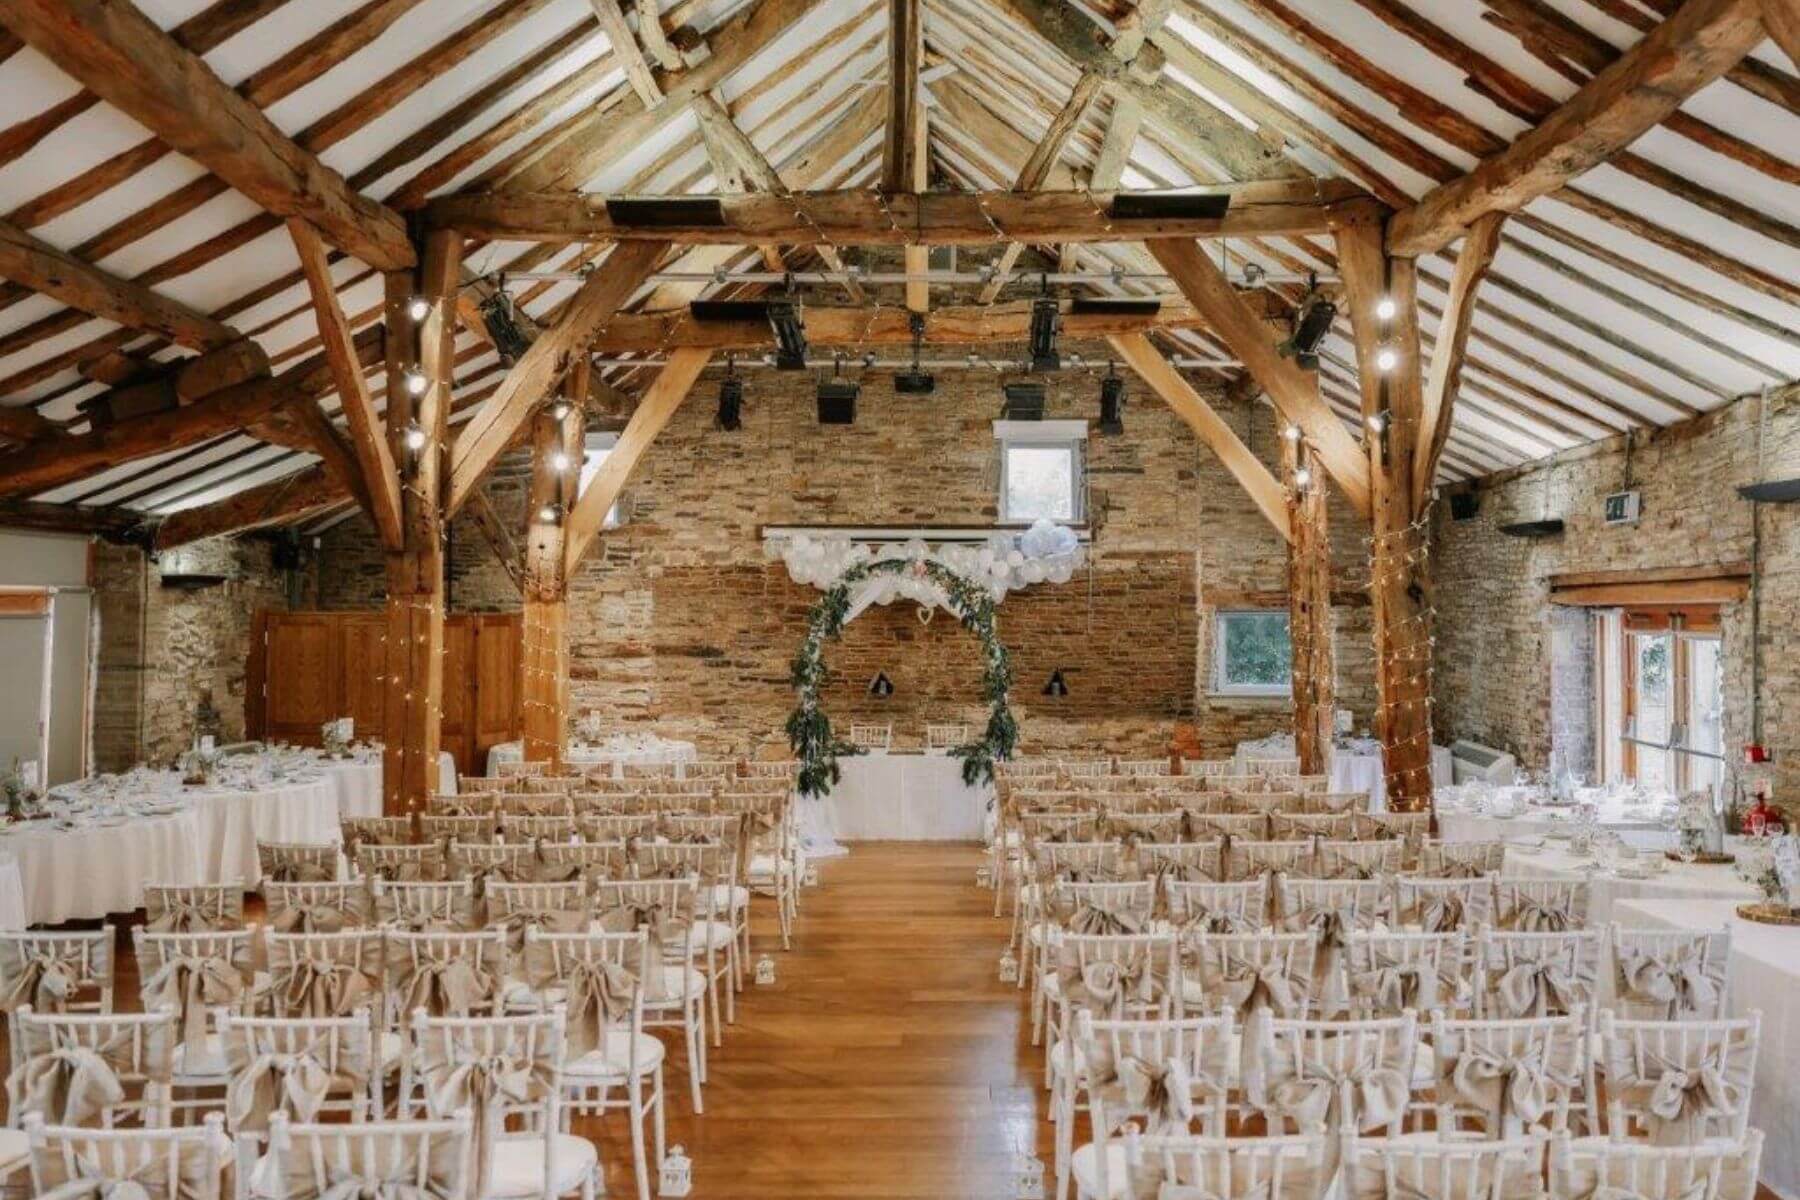 The Northorpe Barn dressed for a wedding